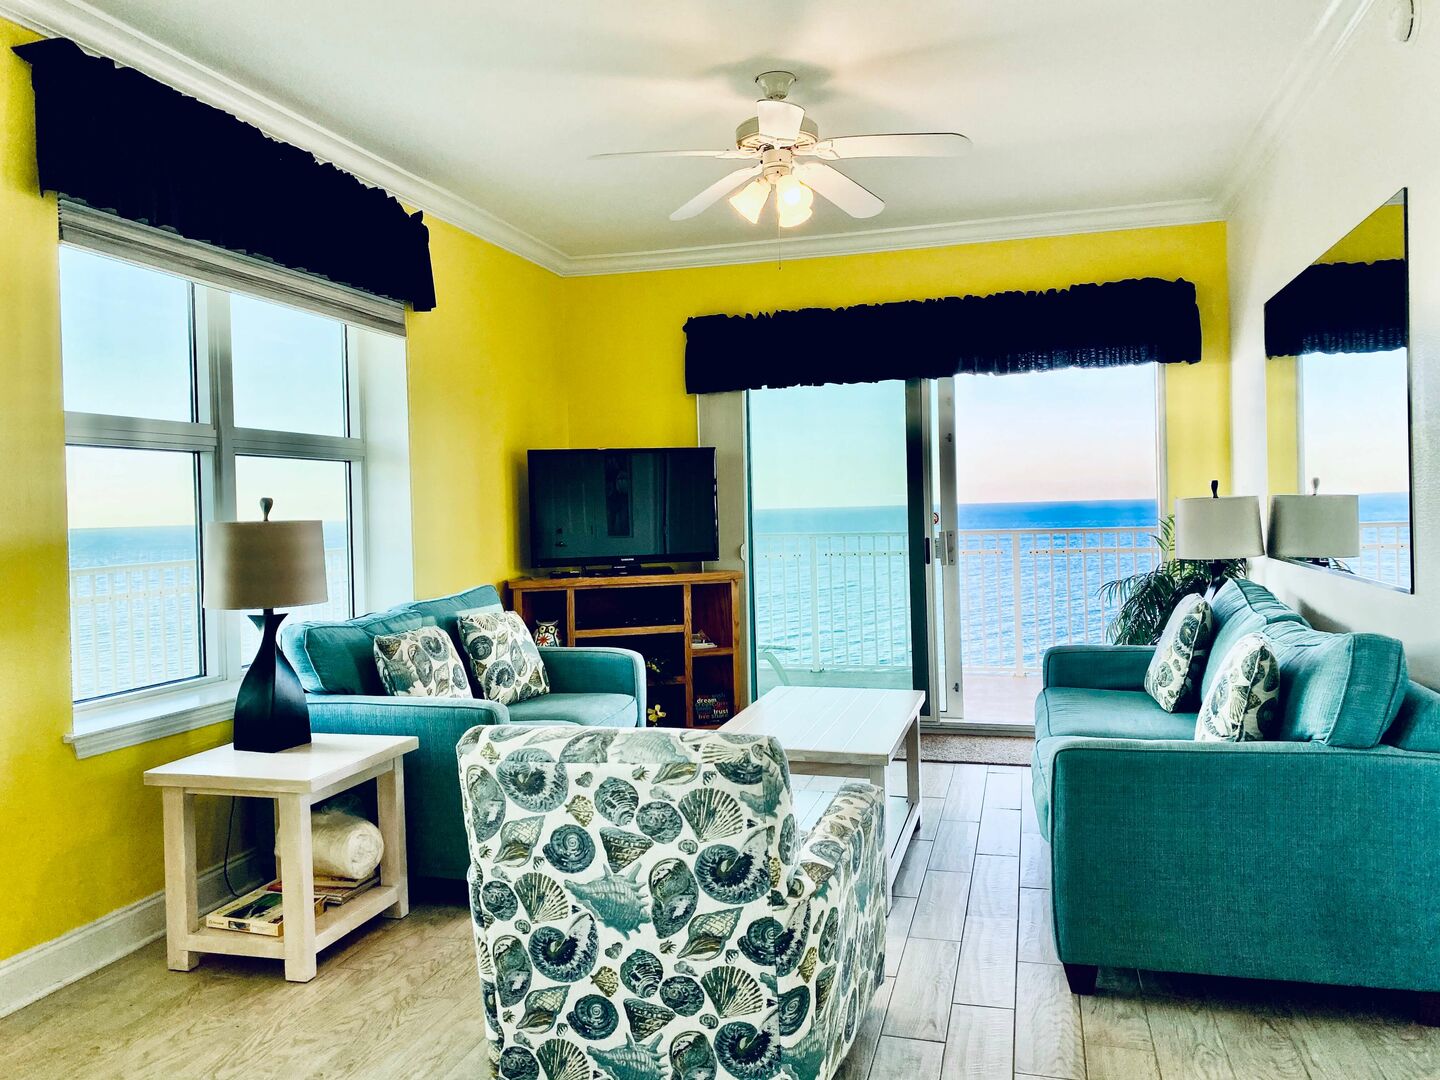 The interior of one of our pet-friendly Orange Beach rentals